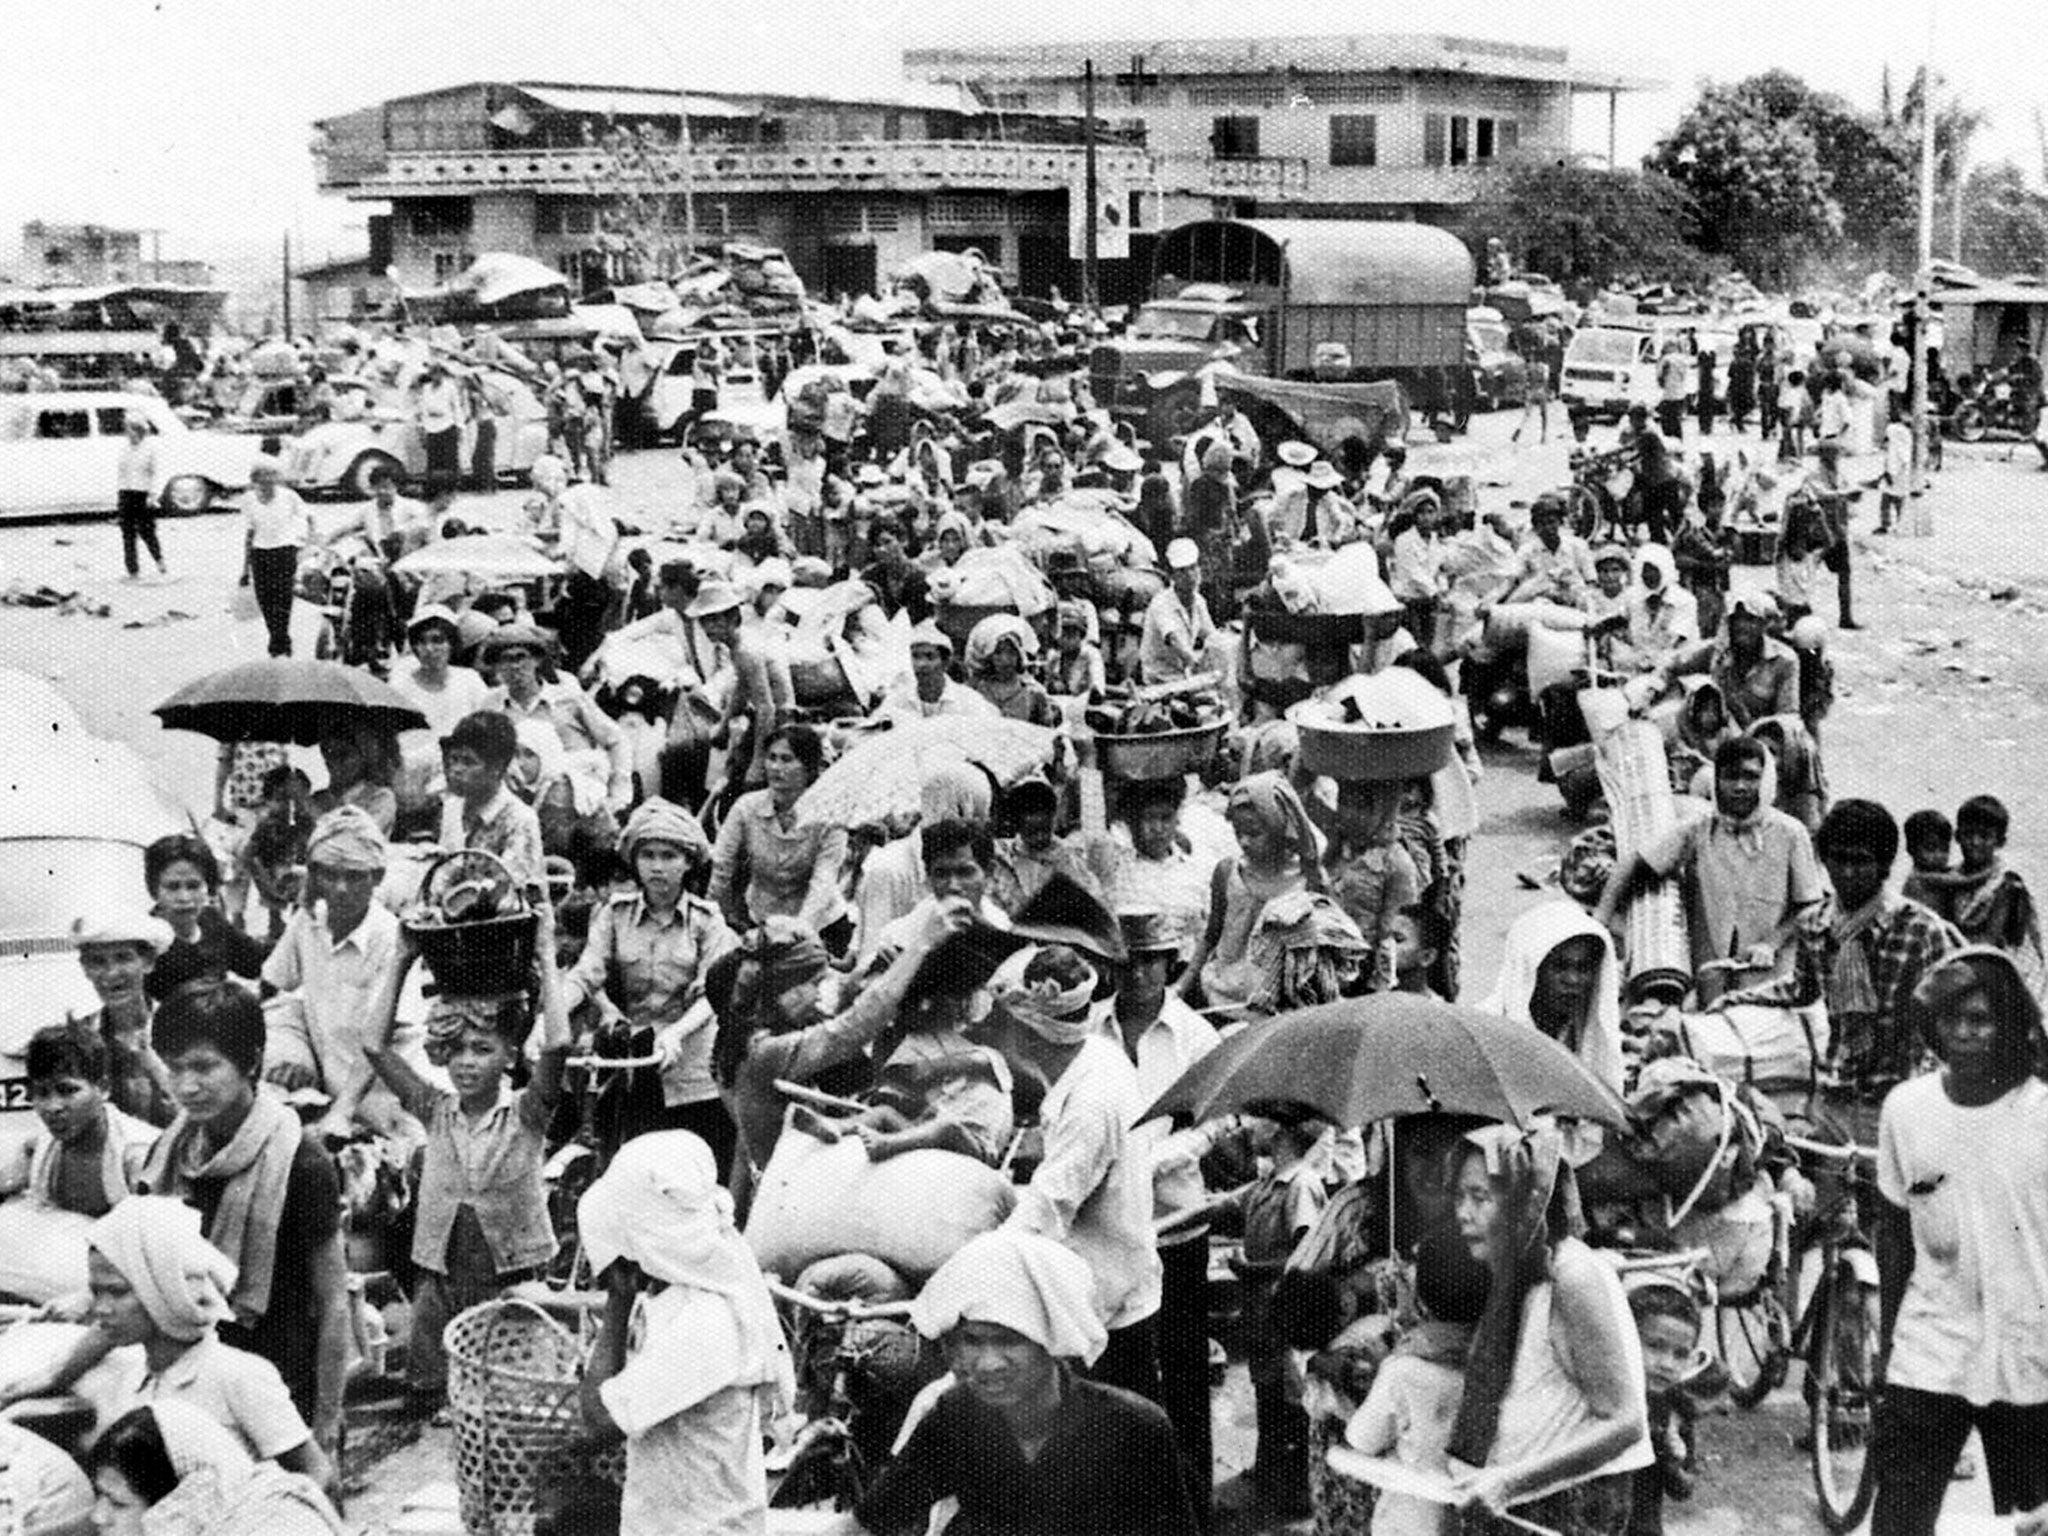 Driven from the city: families flee Phnom Penh after Khmer Rouge forces seize the Cambodian capital in April 1975